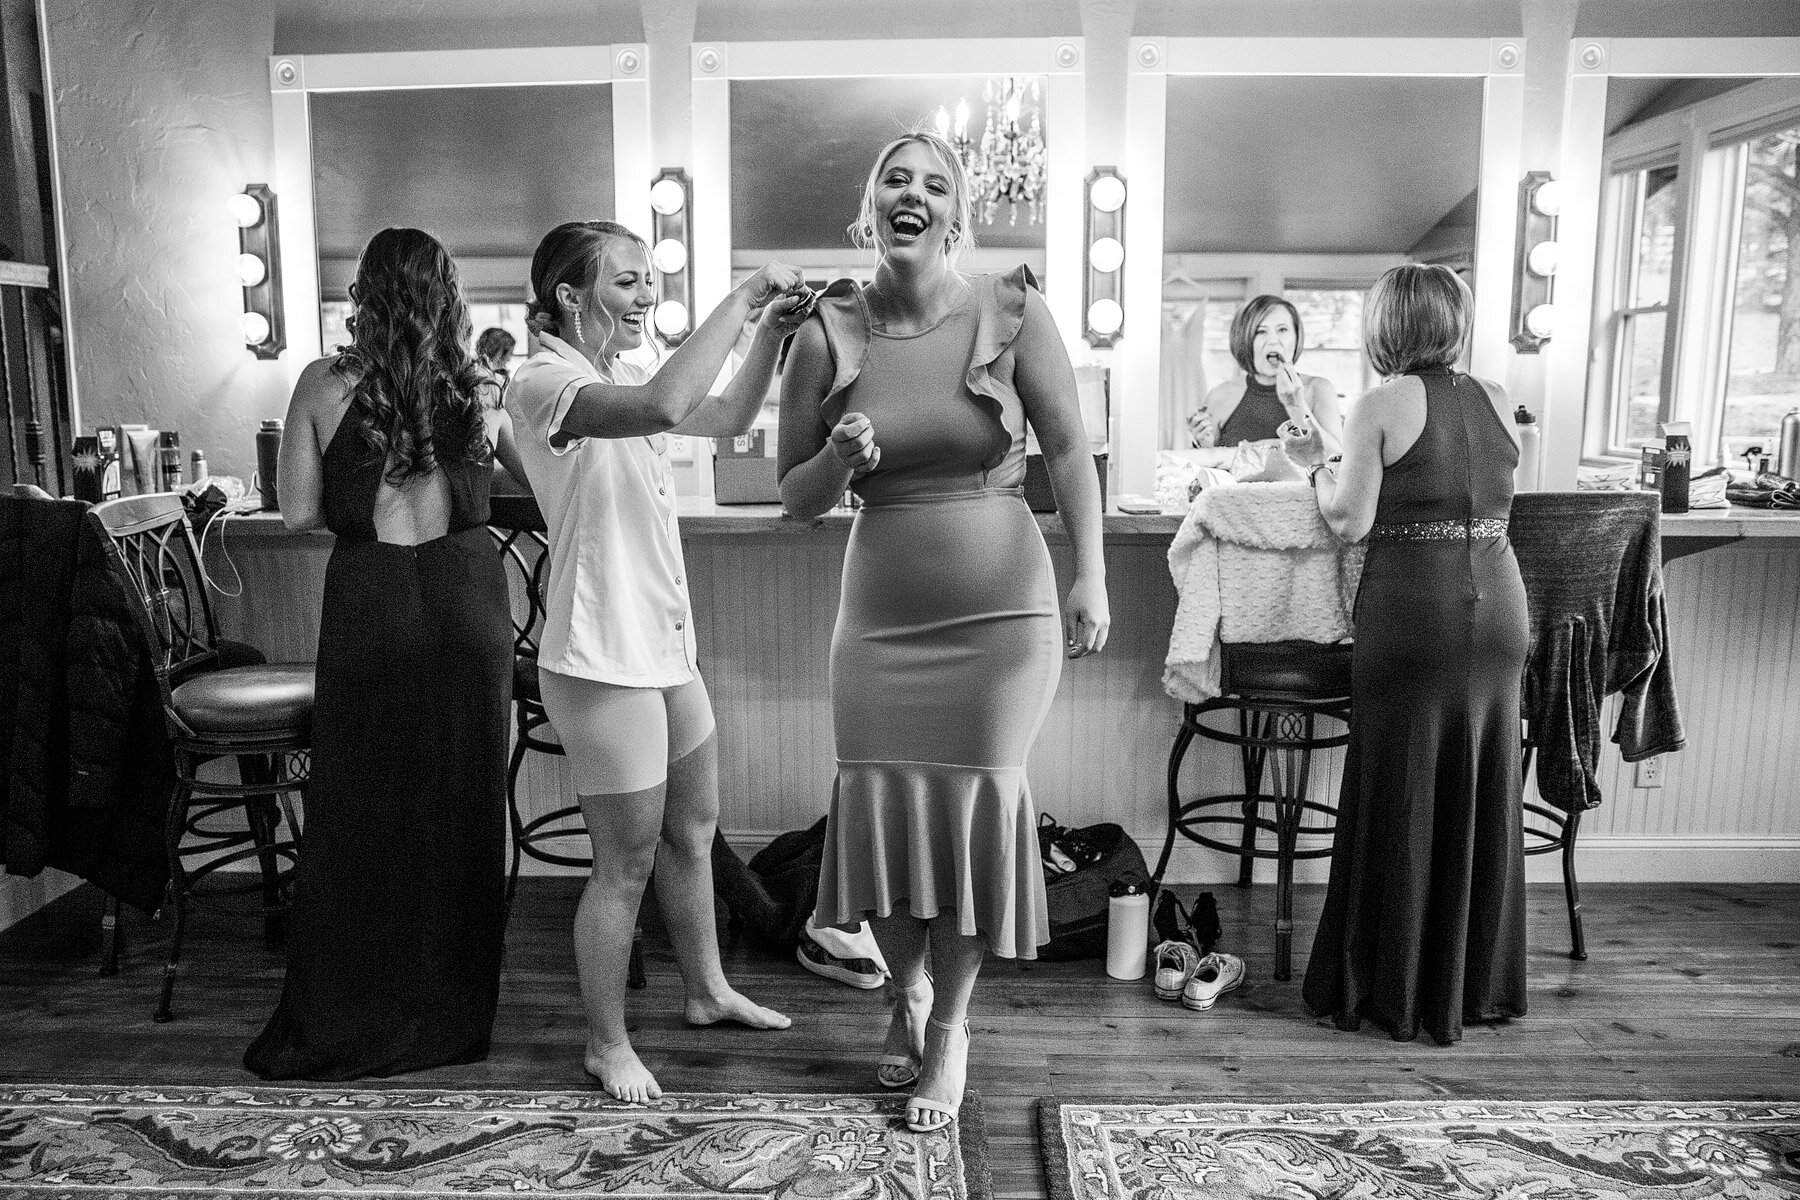  The bride’s room had a lot of laughter and scissor opportunity moments.   